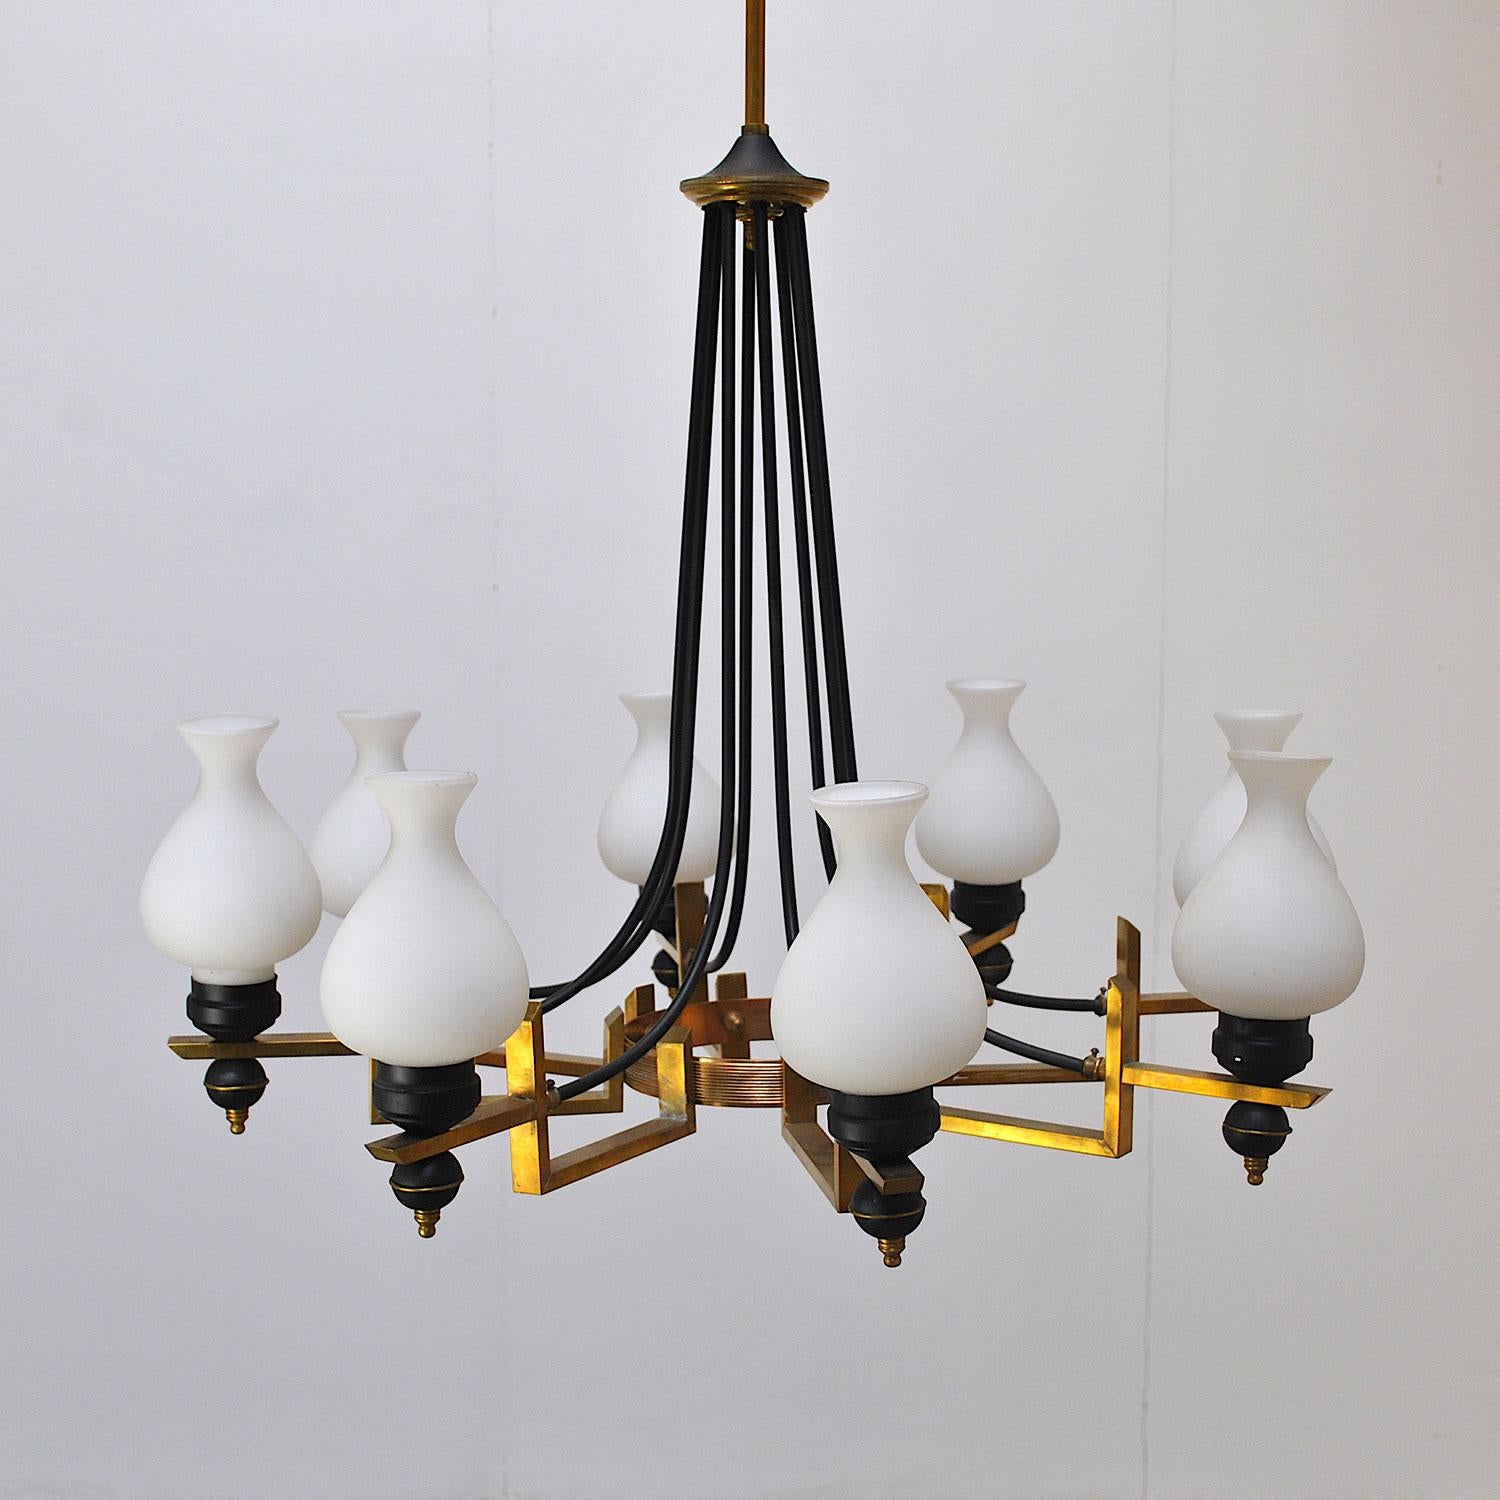 Chandelier Italian production of 1950s with eight Opaline parts and iron and brass structure.
Stilnovo was founded in Milan by Bruno Gatta, whose father, Dino, had previously worked alongside Camillo Olivetti - with whom he graduated in Turin - on